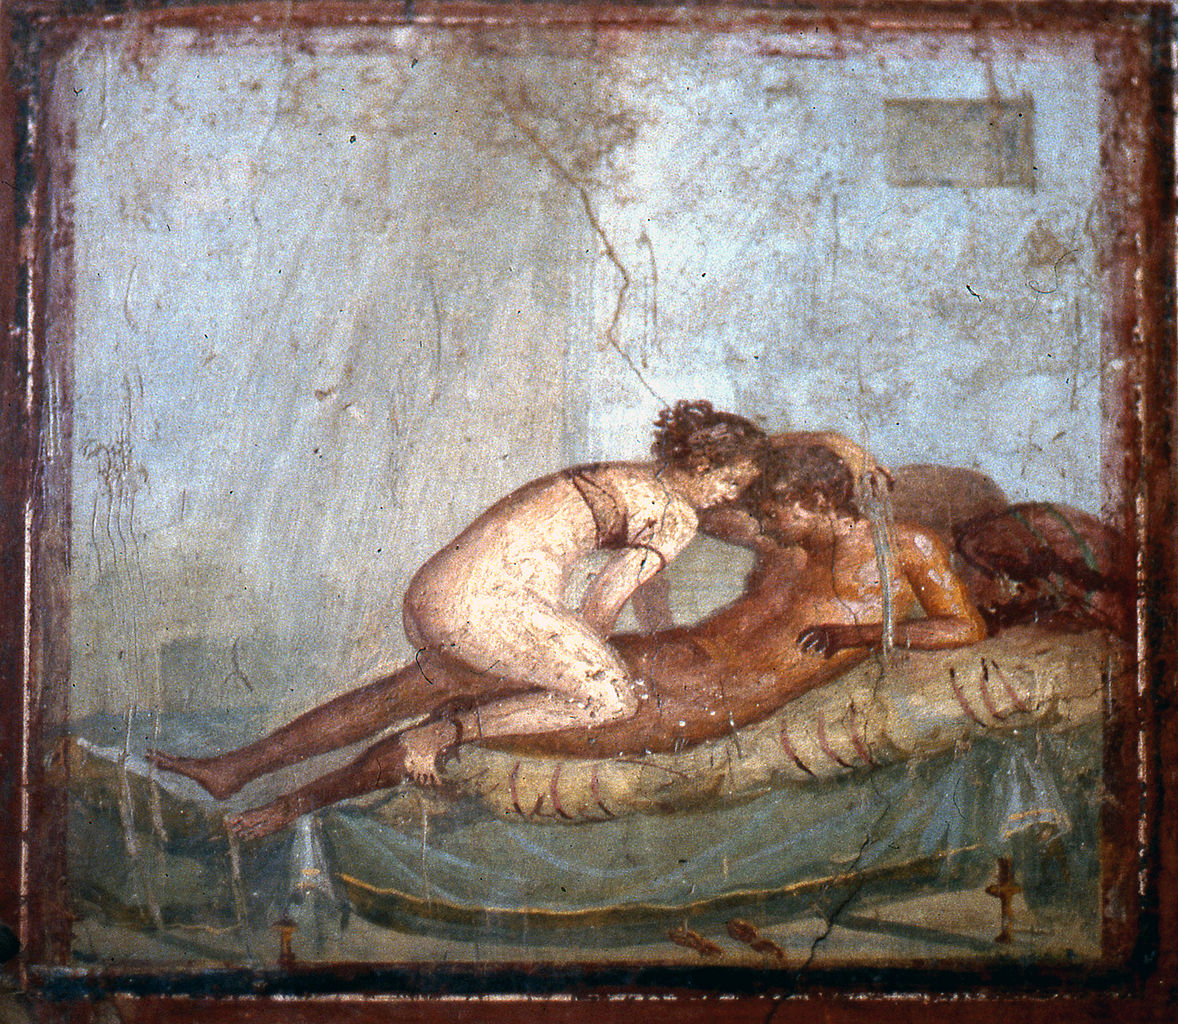 Erotic Images from Ancient Times